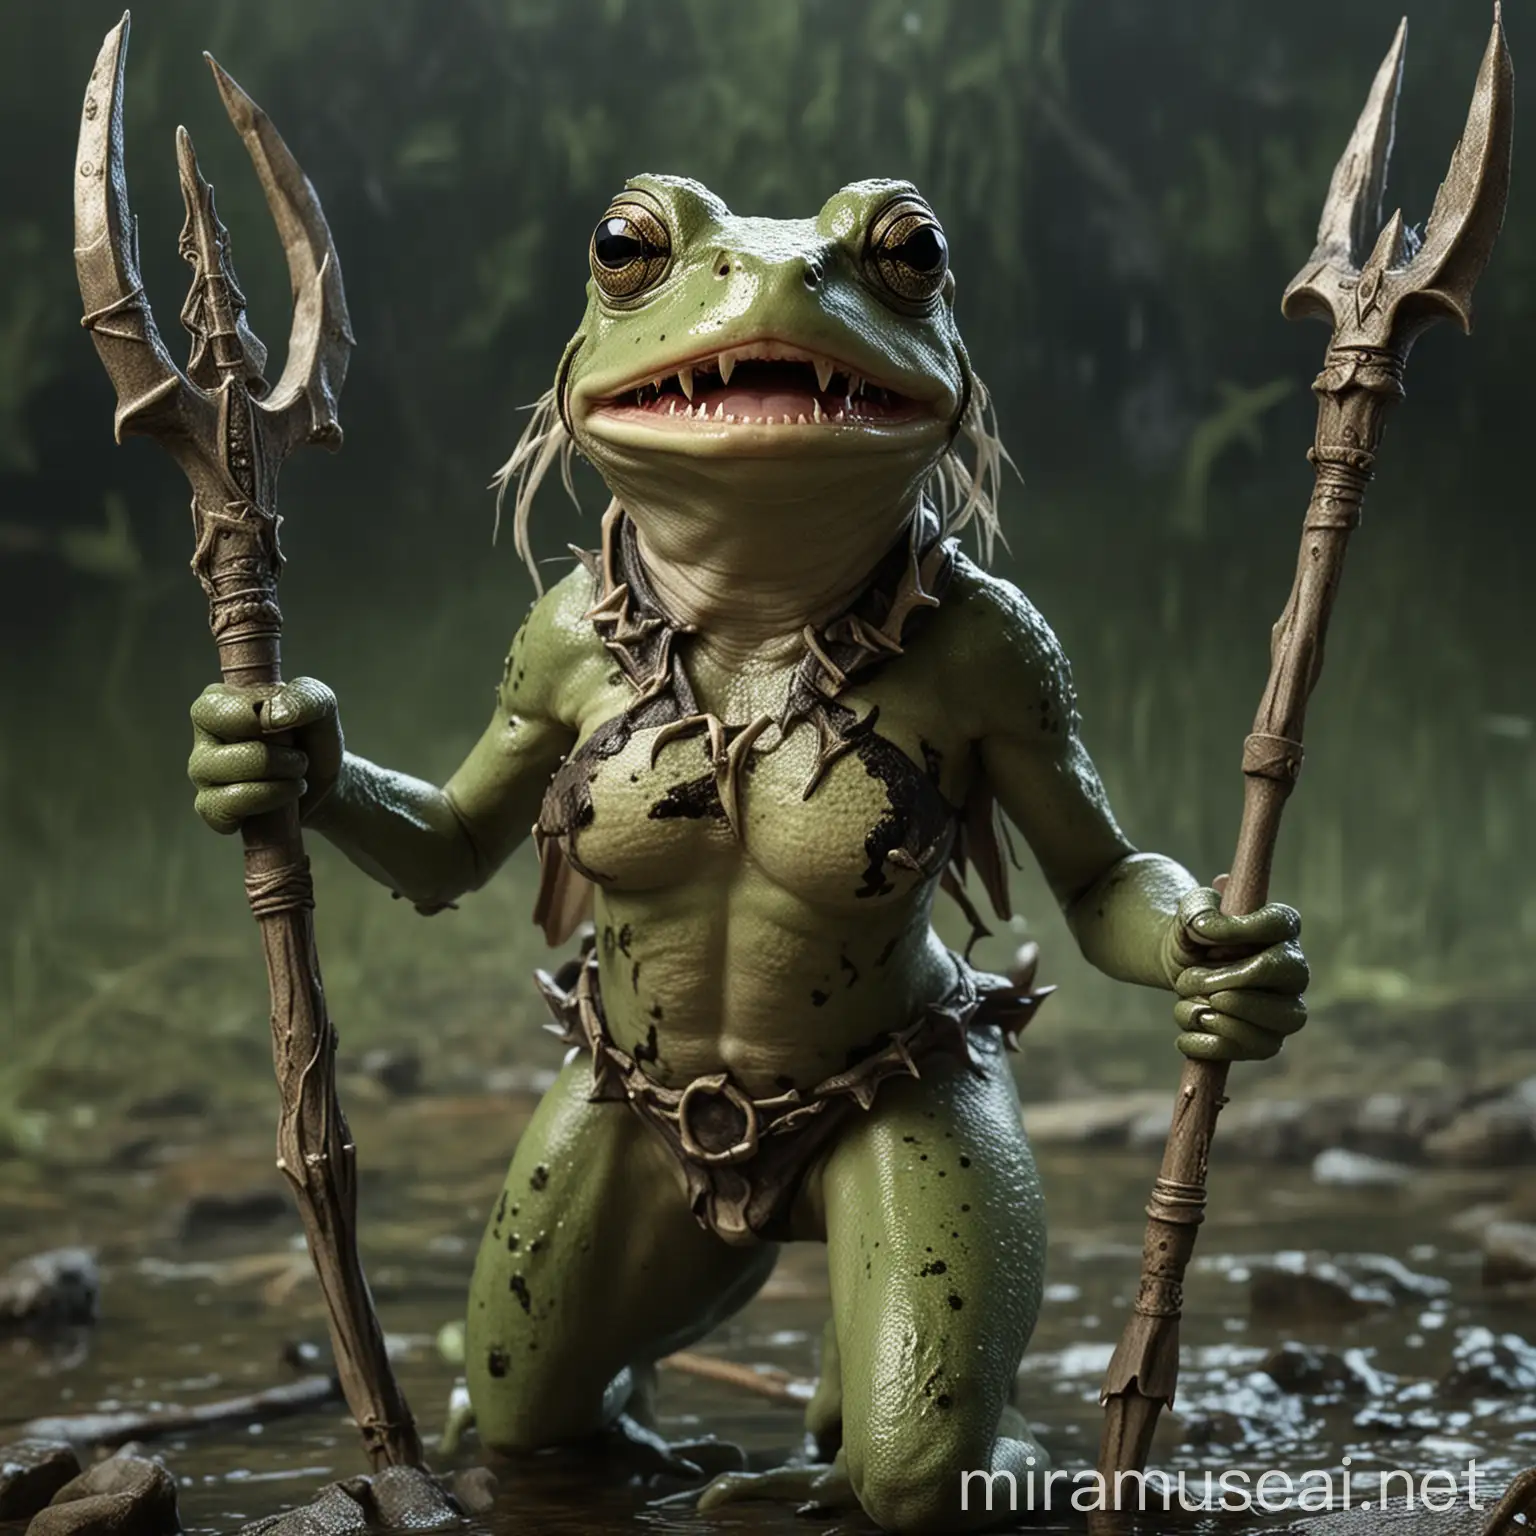 Fierce Female Frog with Fangs and Trident in Hand